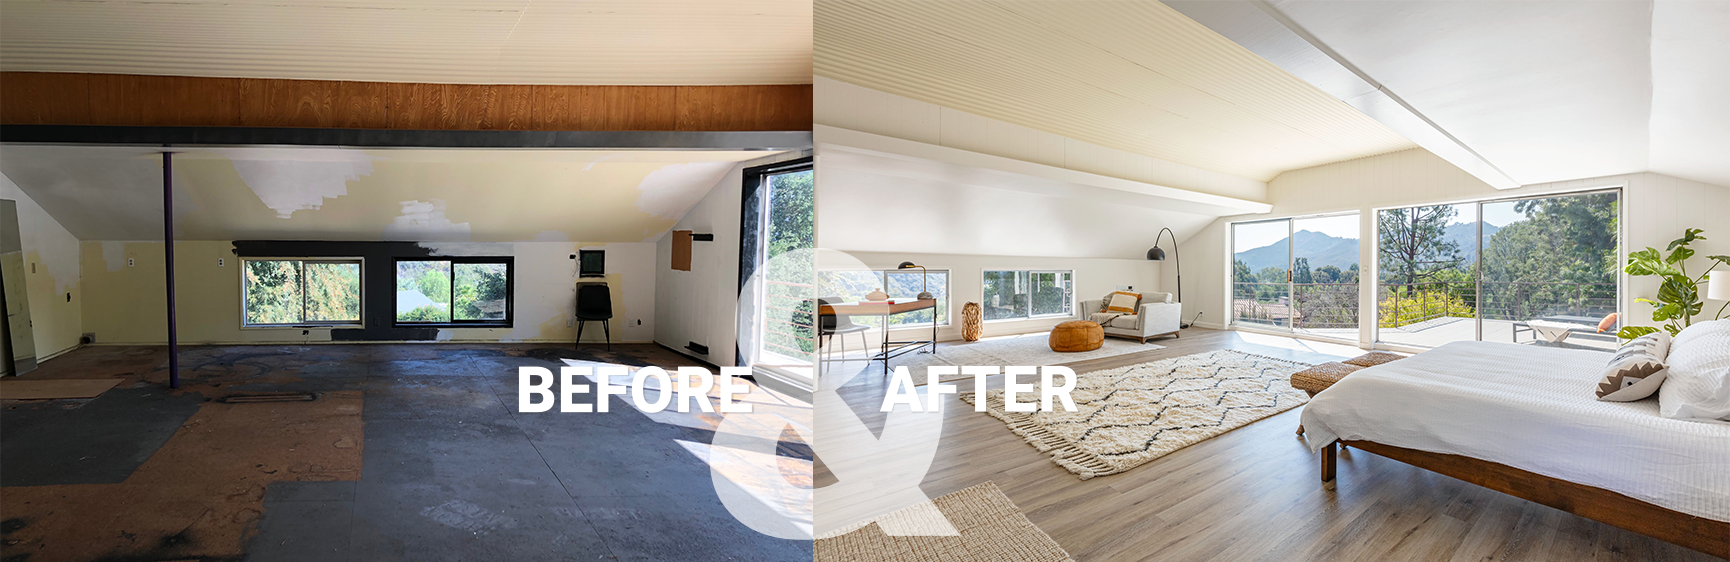 Dramatic transformation of a spacious bedroom, with floor to ceiling windows, before and after a RealVitalize renovation